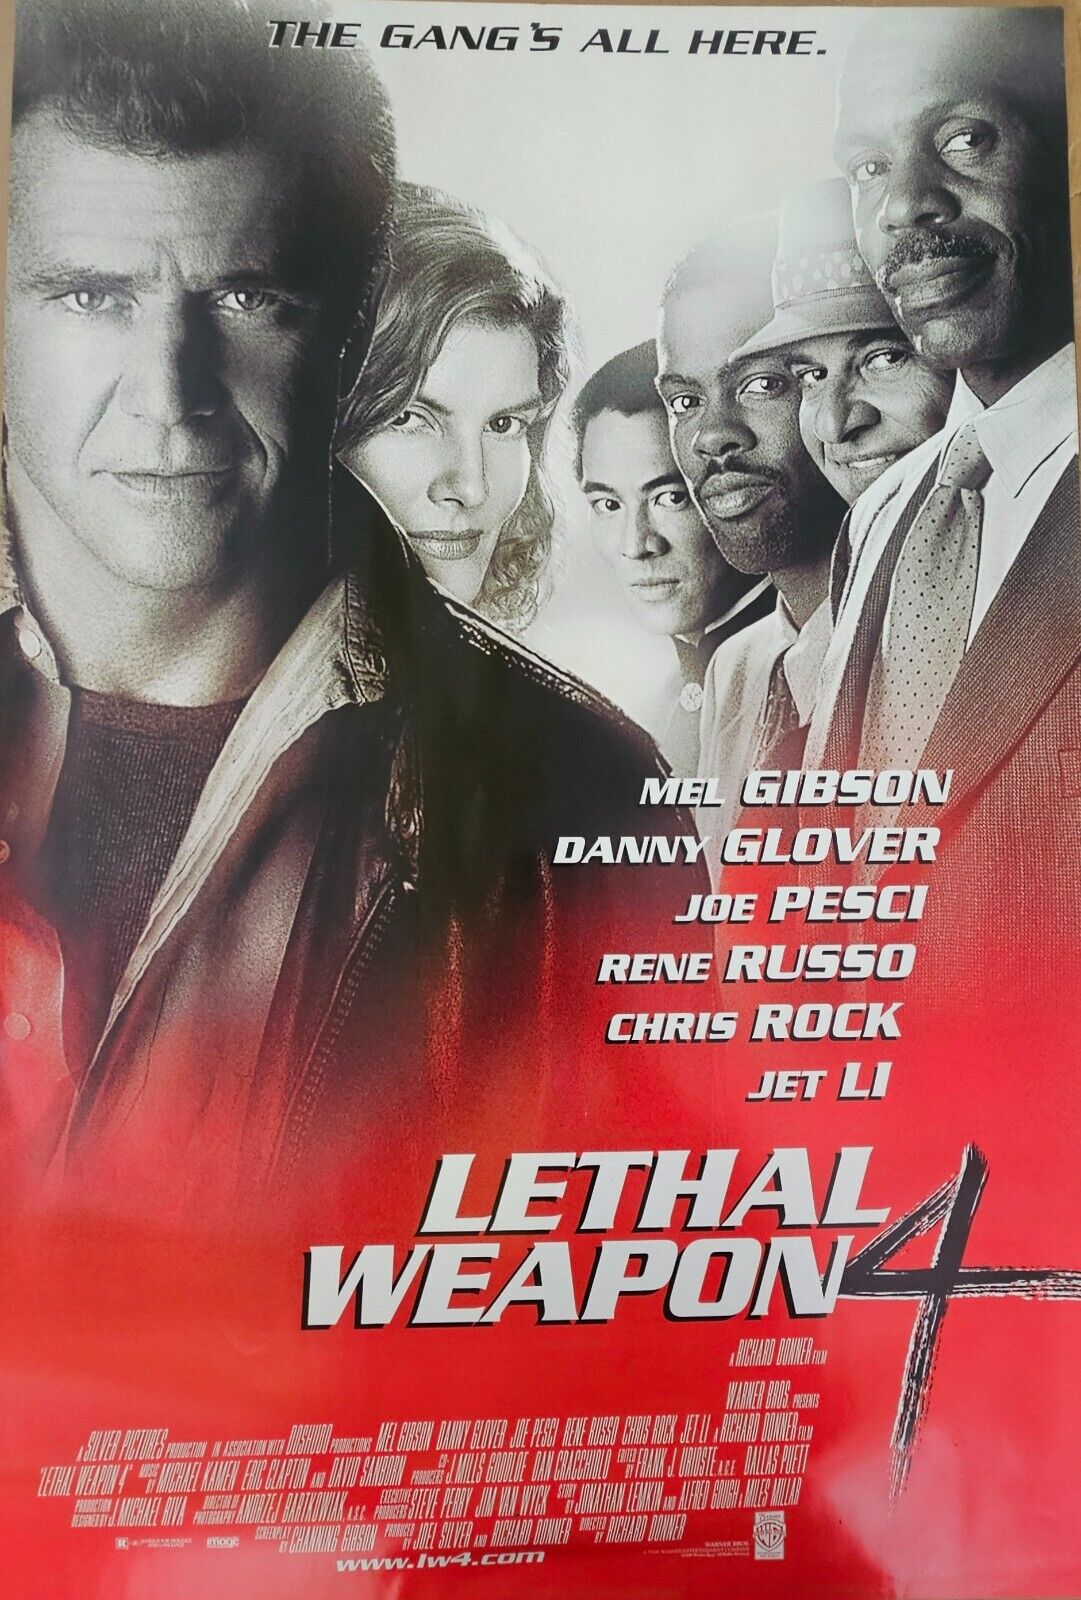 Mel Gibson , Danny Glover, Jet Li in Lethal Weapon 4 27x 40   MOVIE POSTER